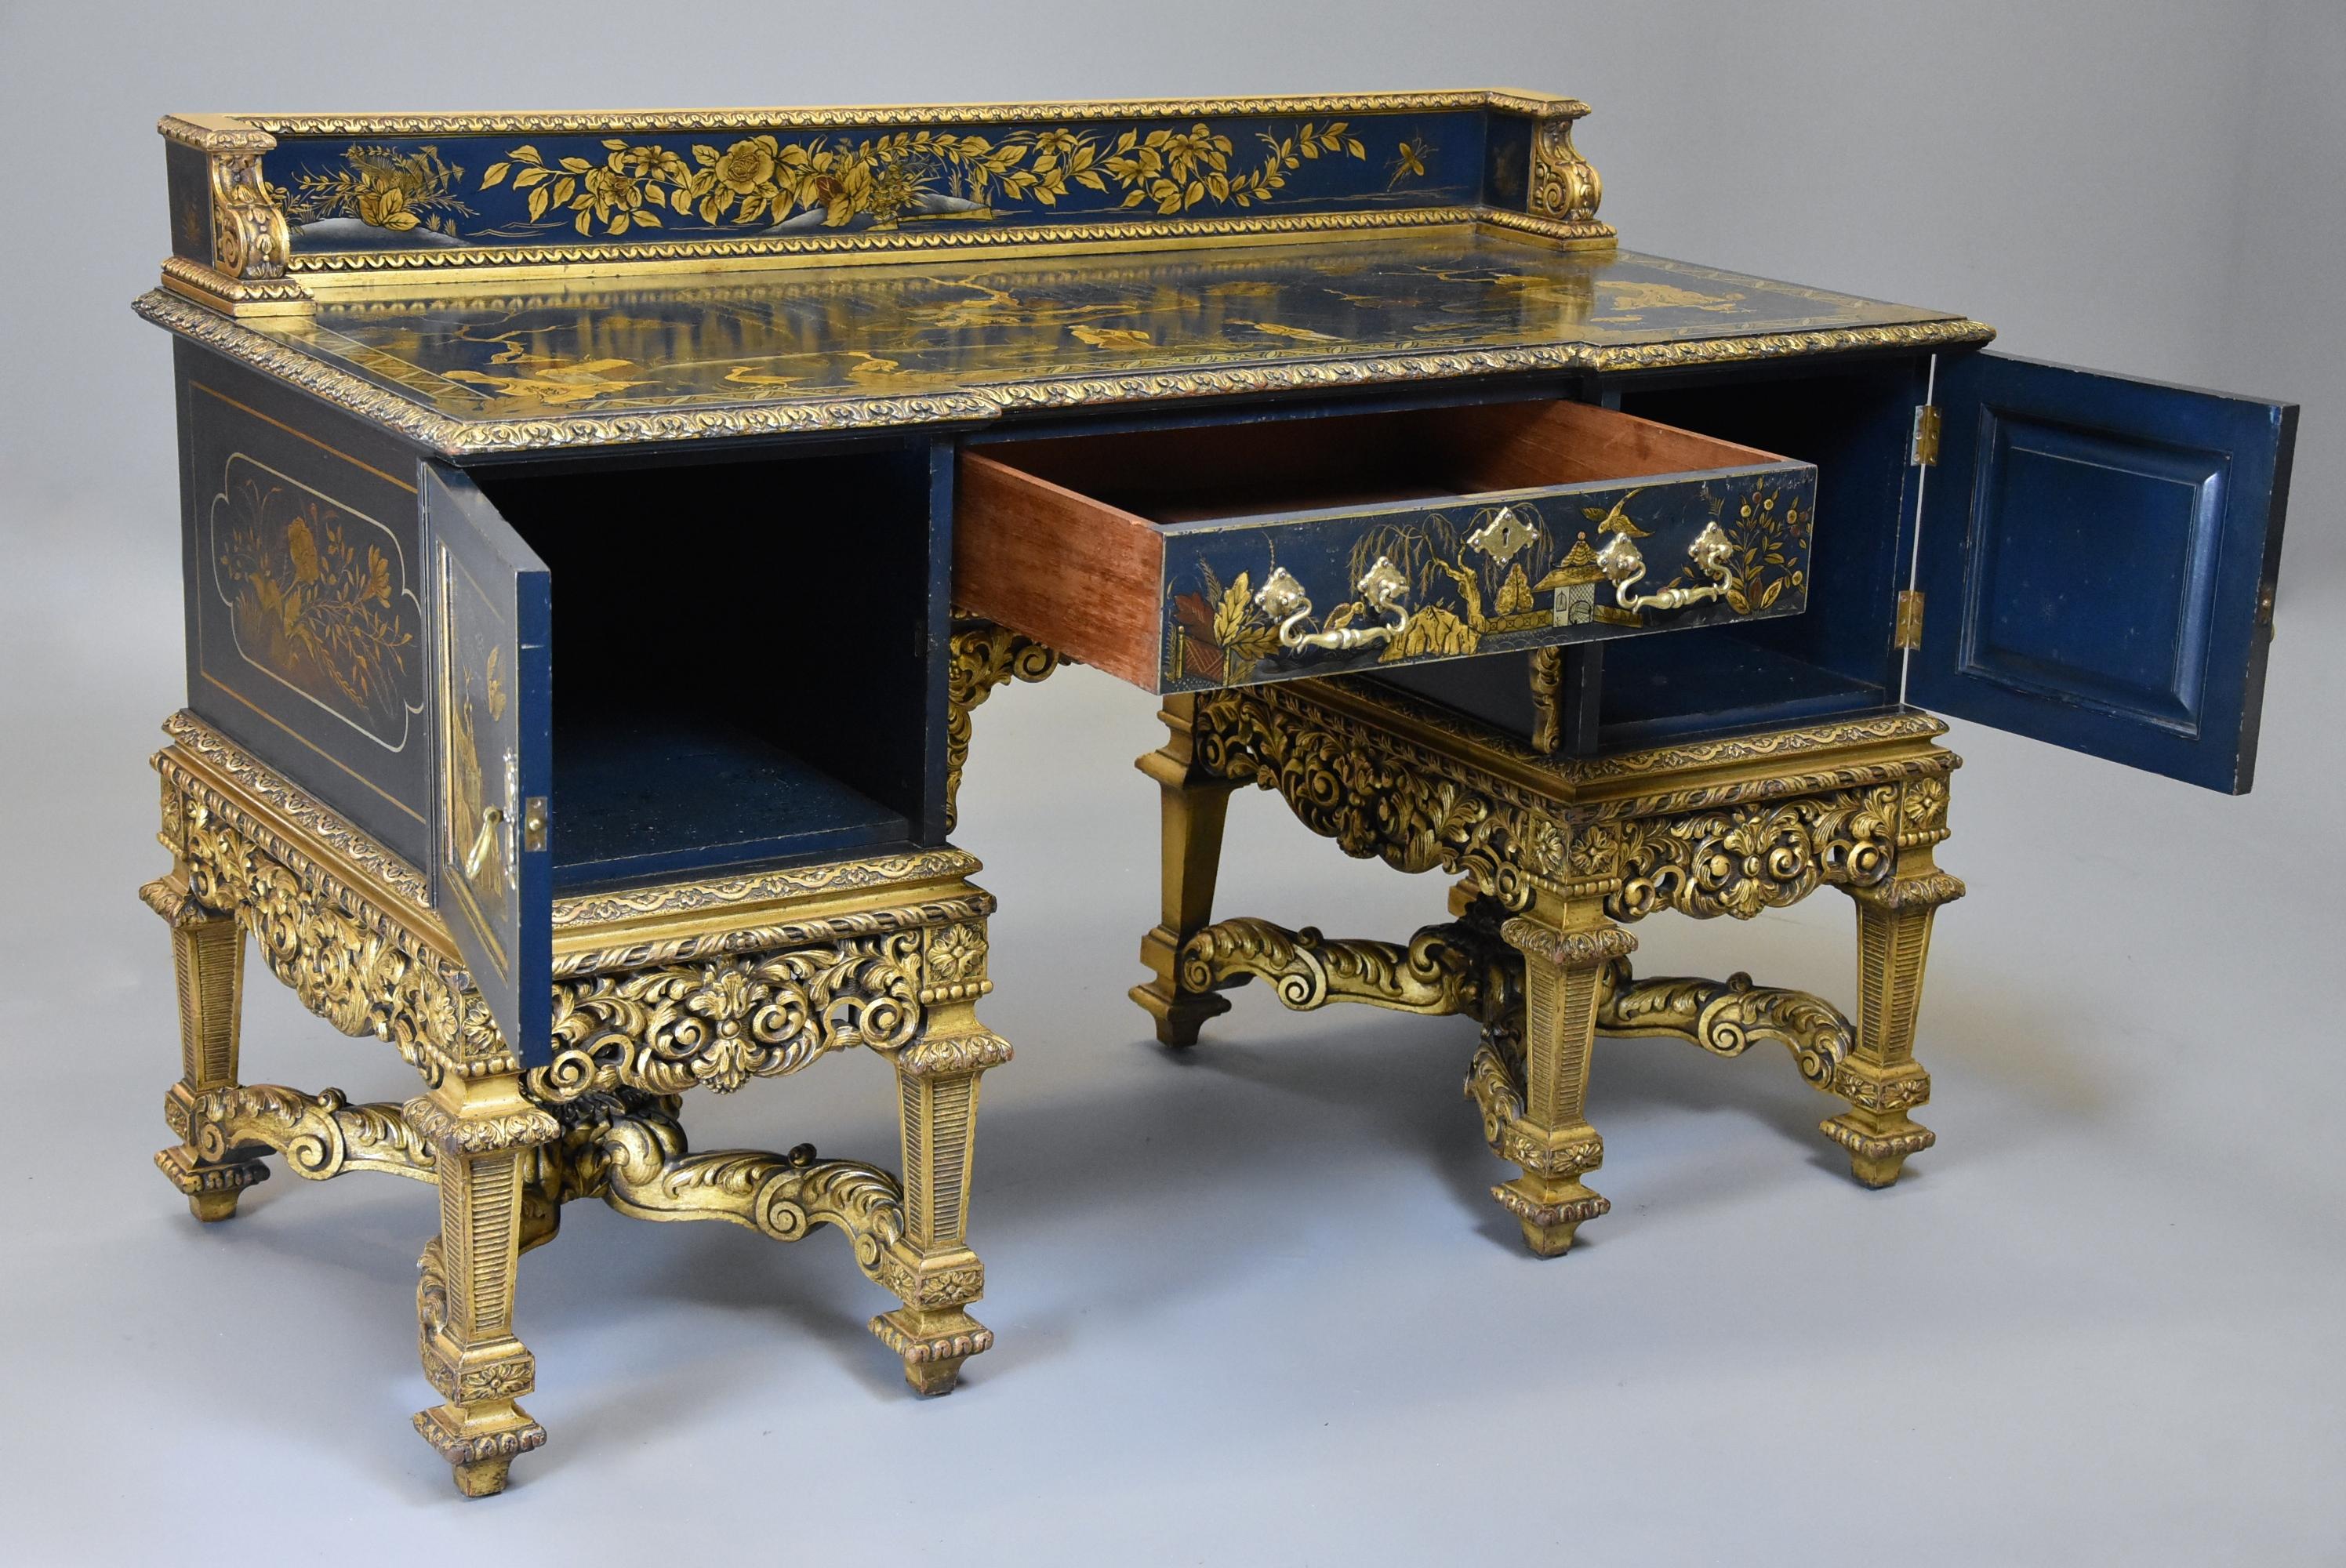 20th Century Superb Highly Decorative Charles II Style Blue & Gilt Chinoiserie Dressing Table